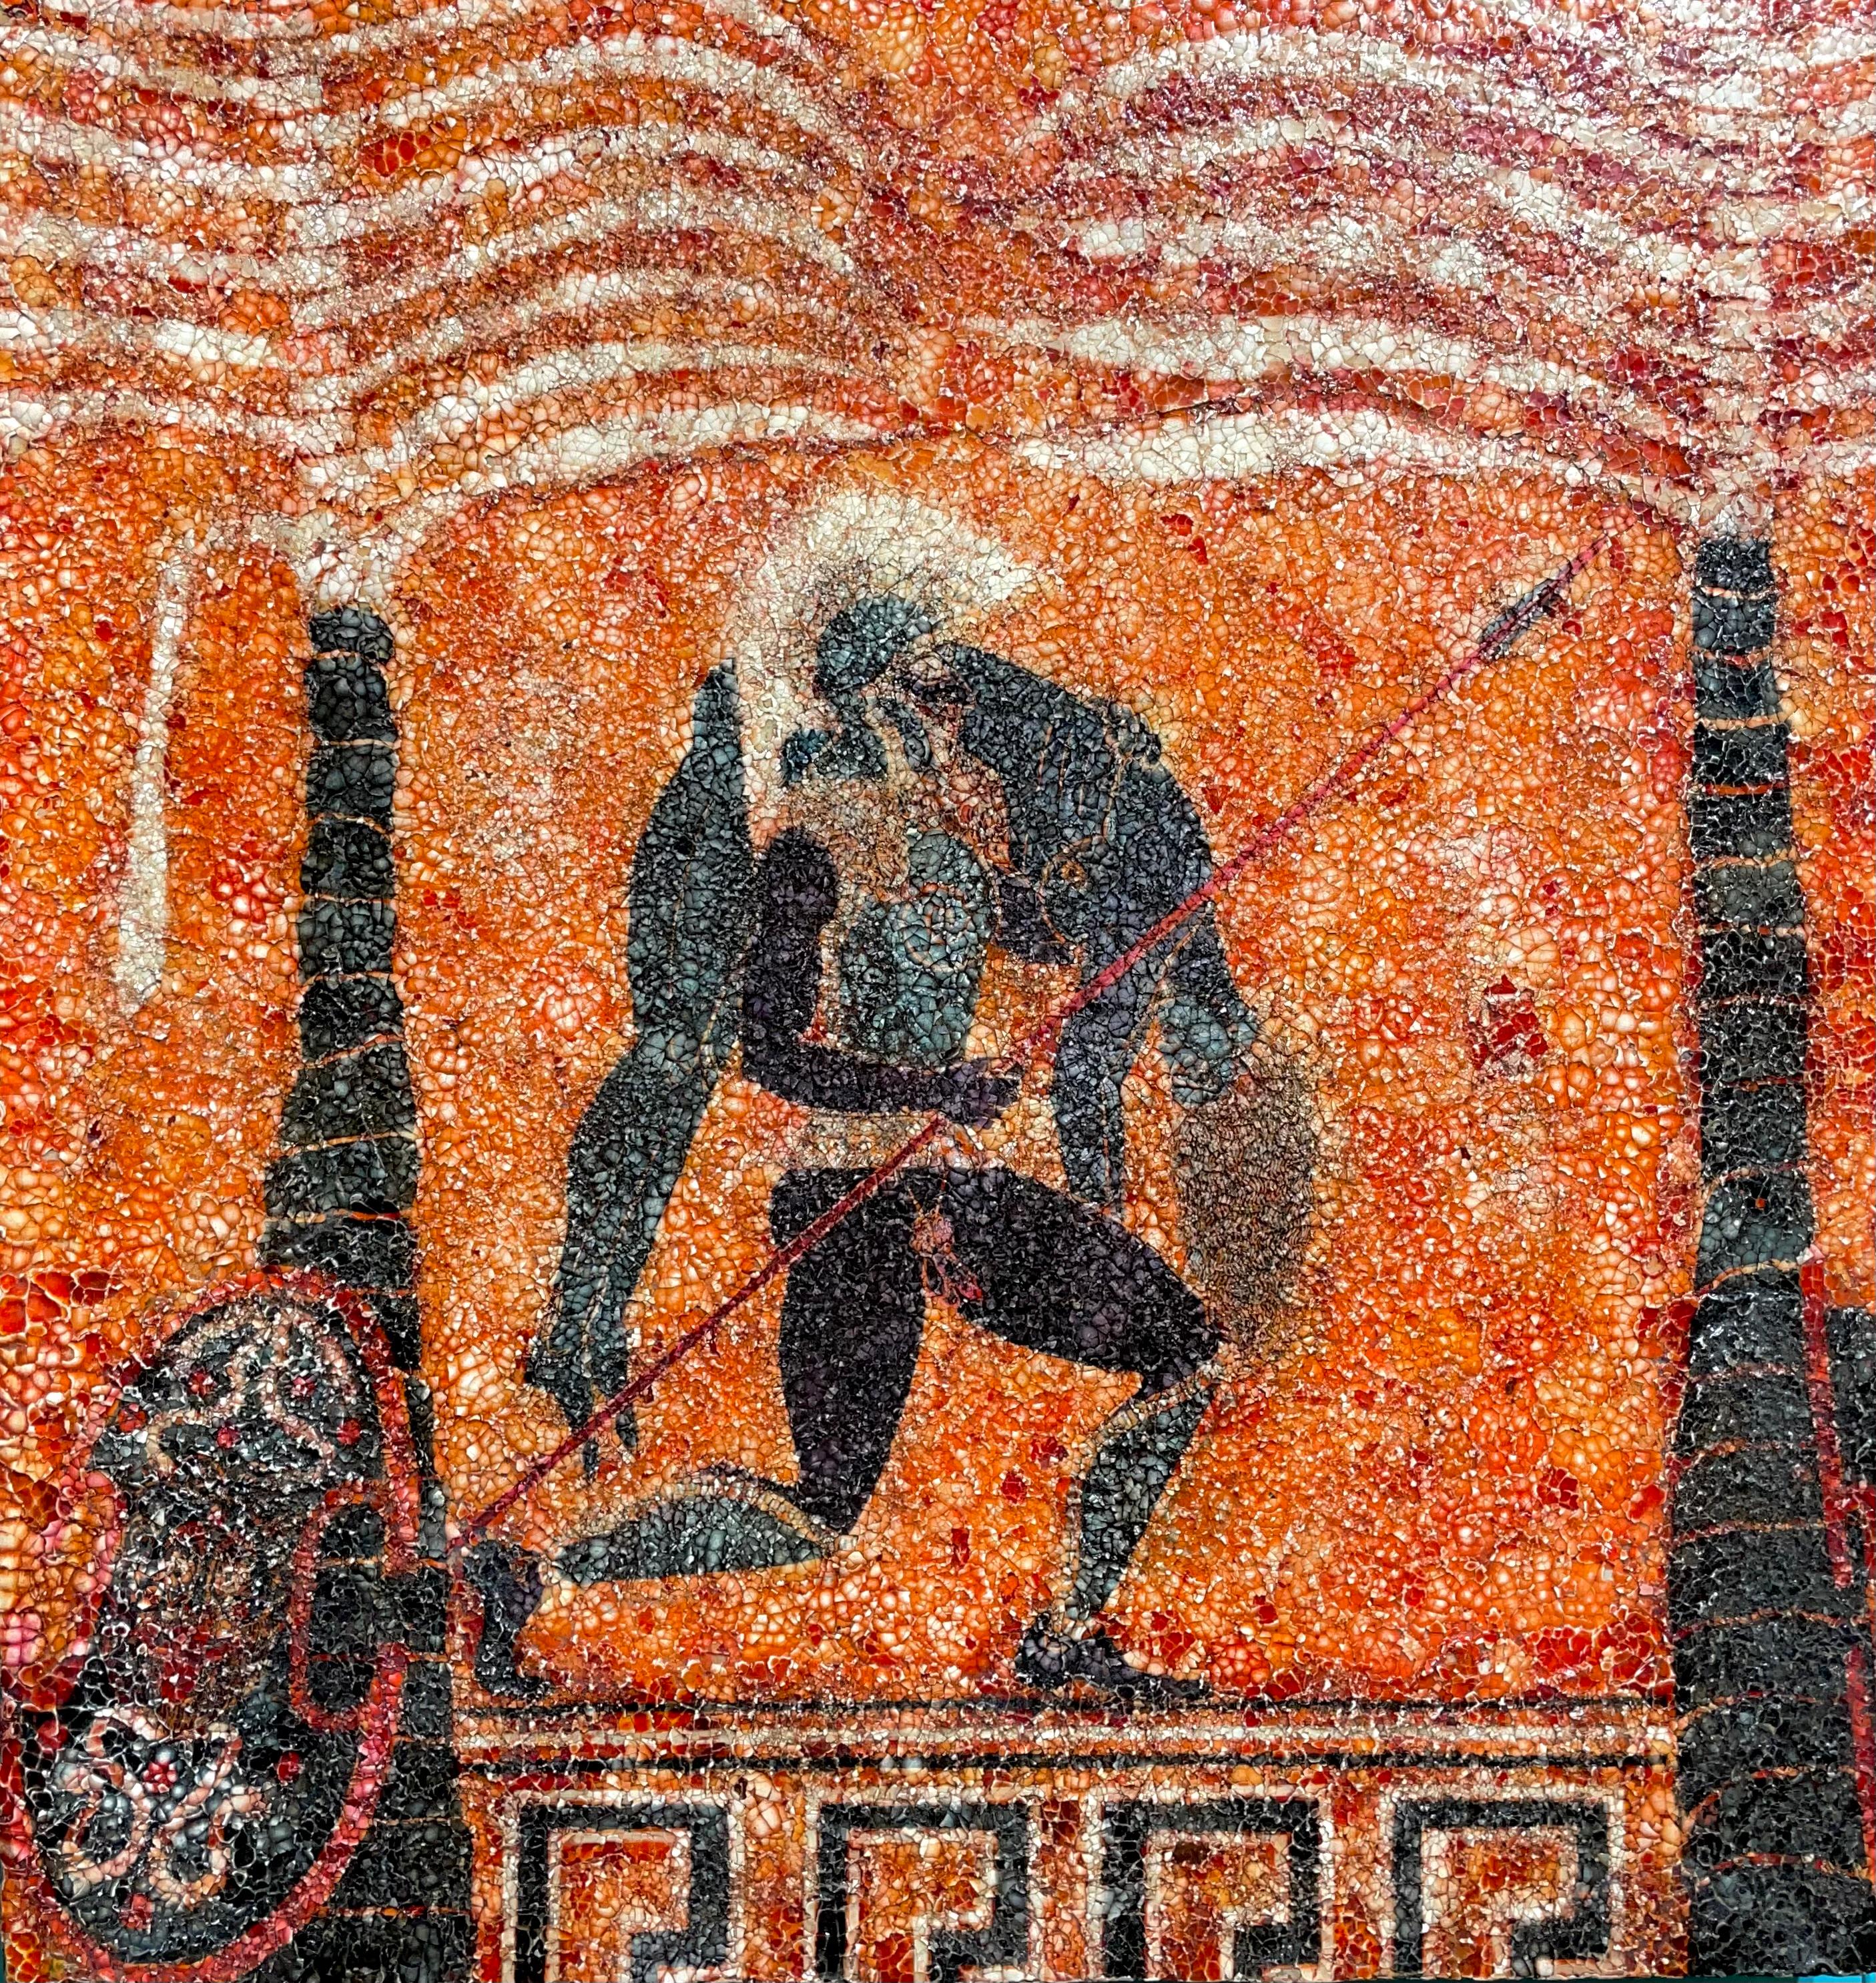 Eggshell Collage: "Ajax carrying the dead Achilles"